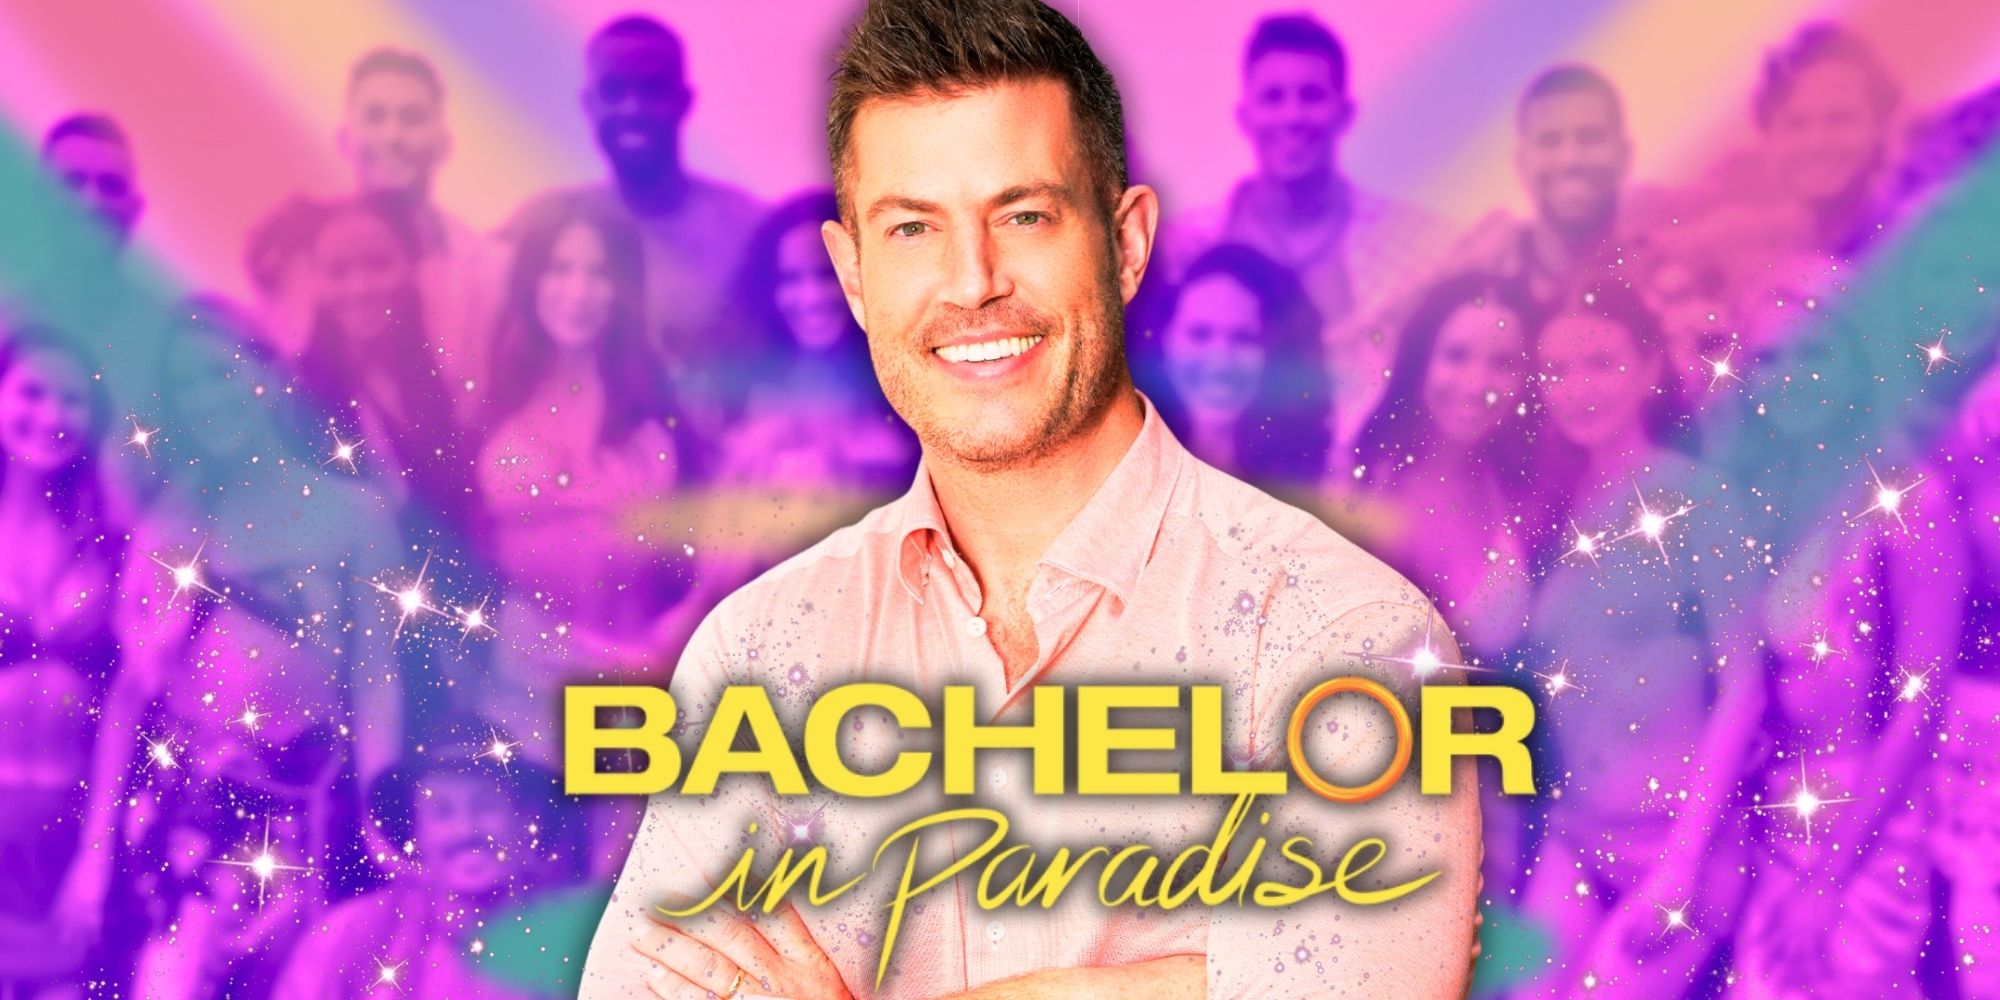 Bachelor in Paradise' Season 9 Wedding Is a 'Full Circle' Moment